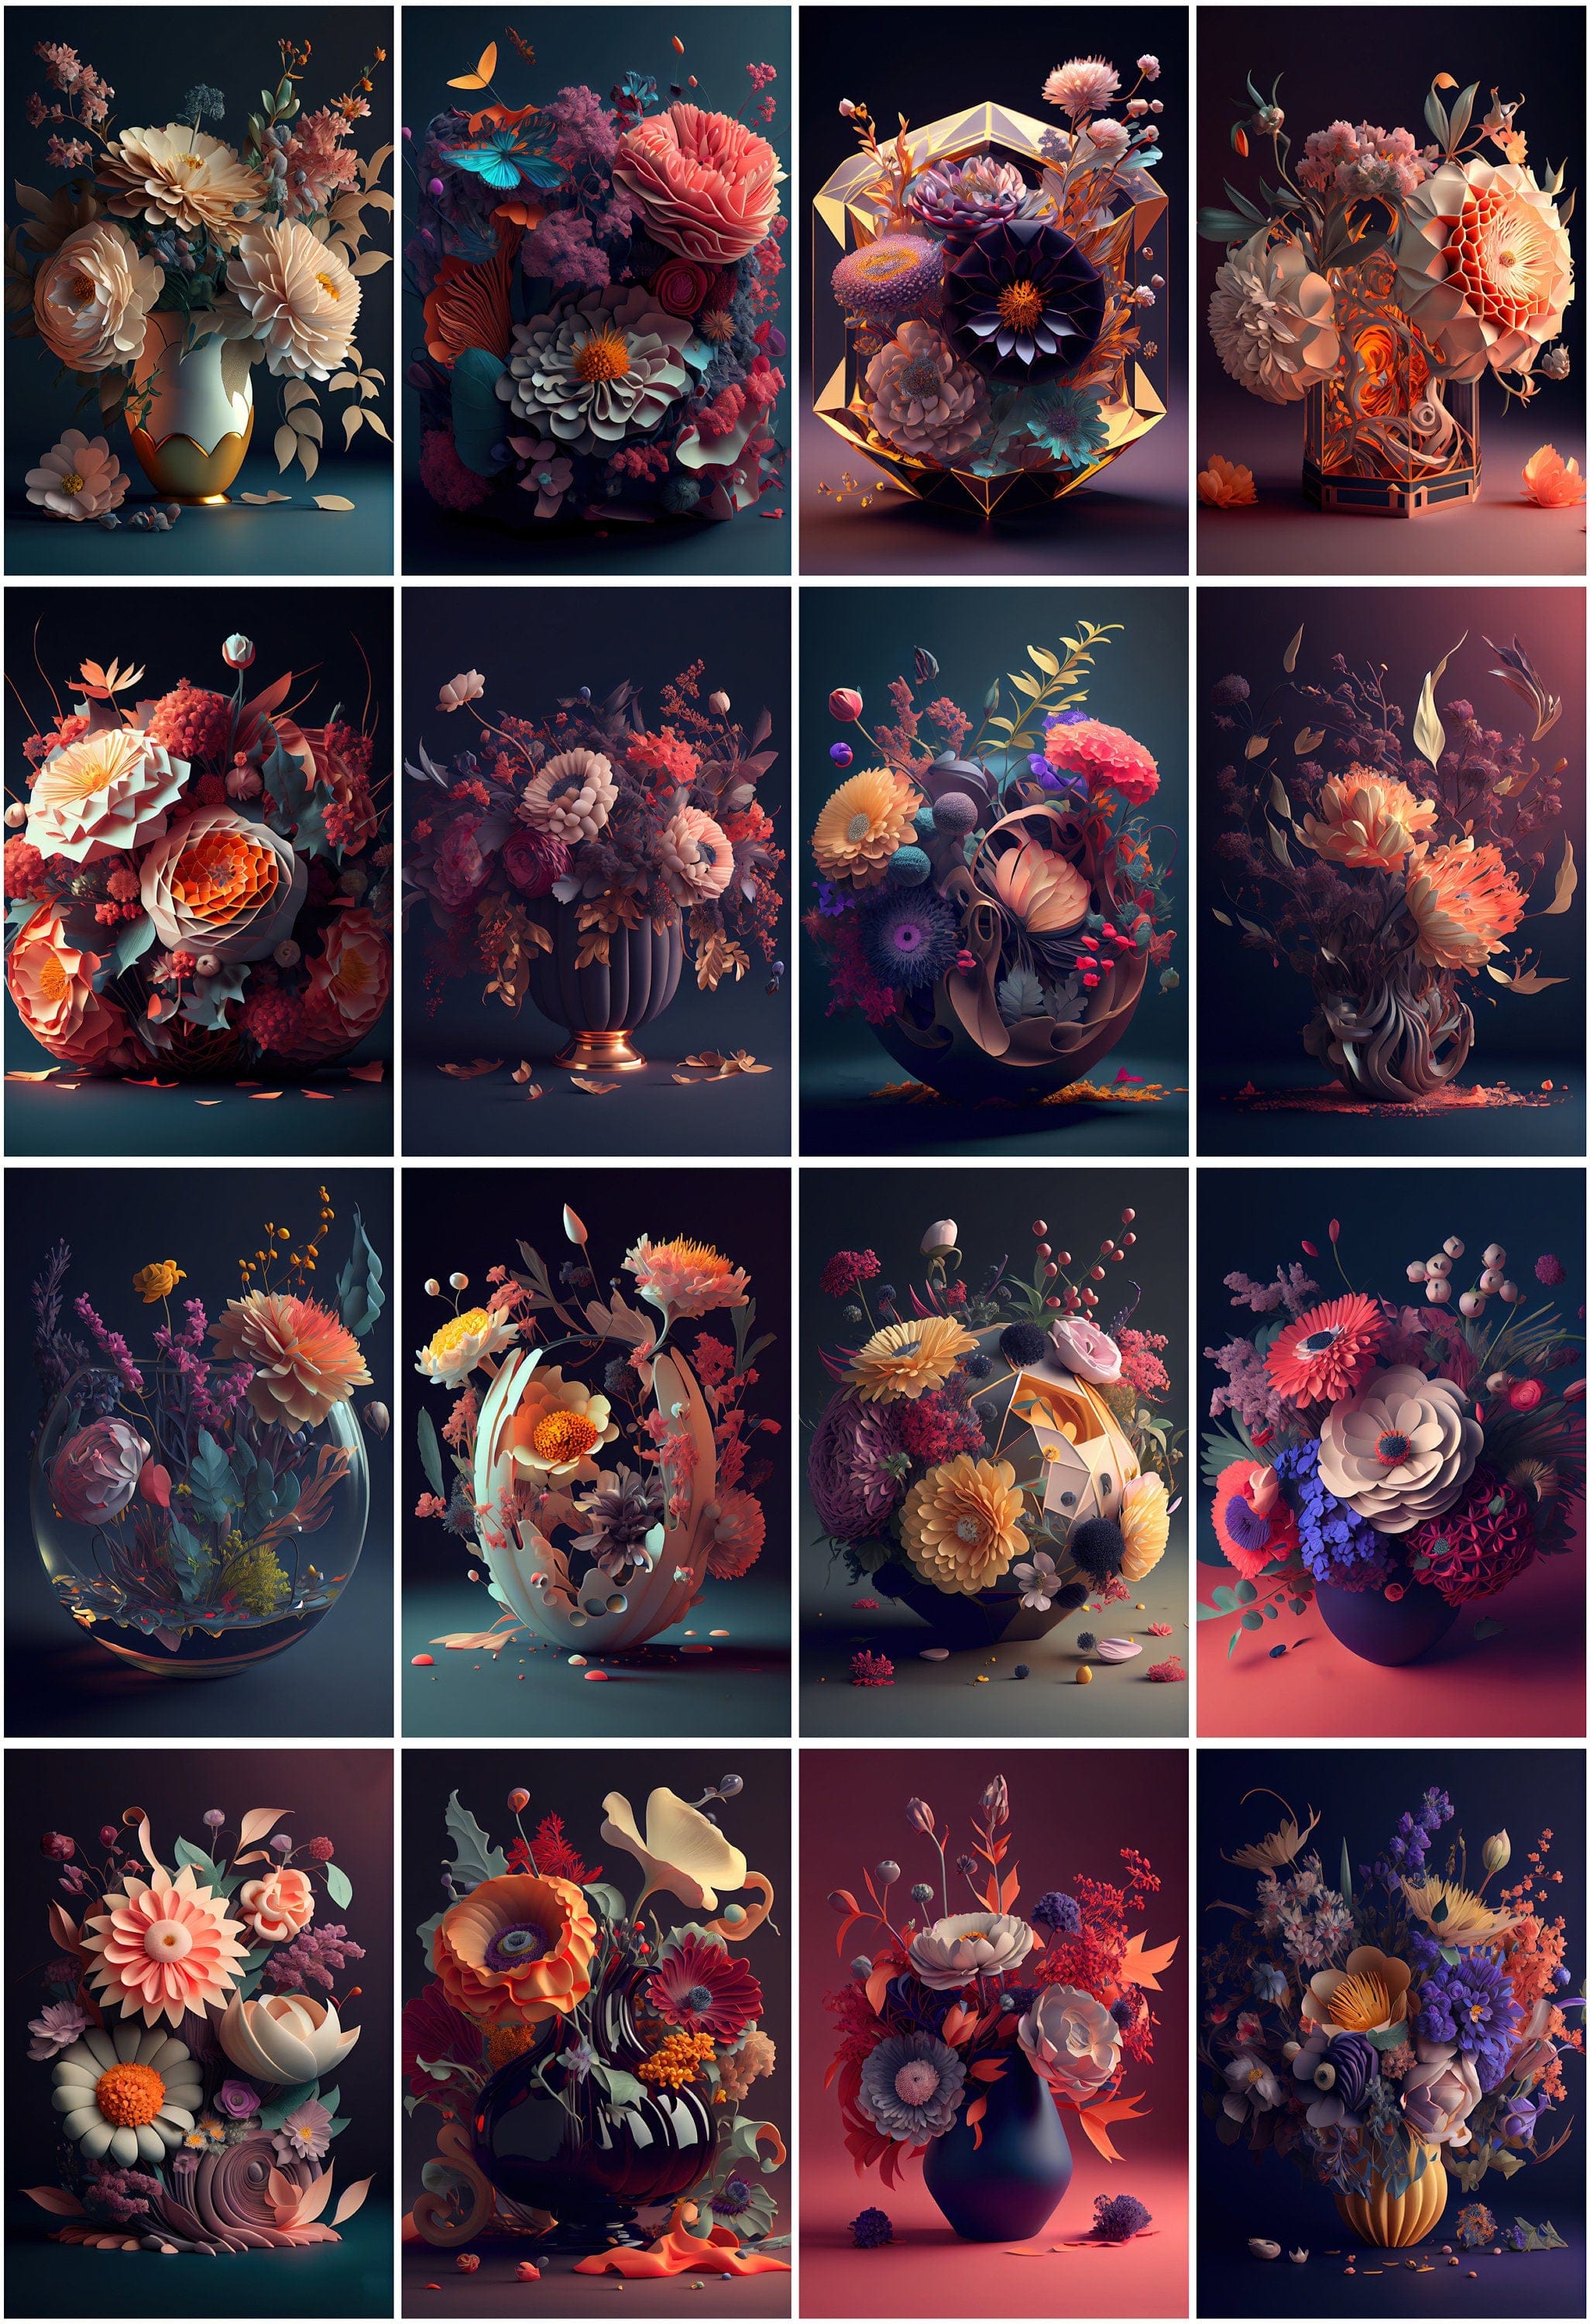 250 Image Bundle Featuring Gorgeous Floral Arrangements - Elevate Your Wall Art and Add a Technical Touch to Your Creative Projects Digital Download Sumobundle